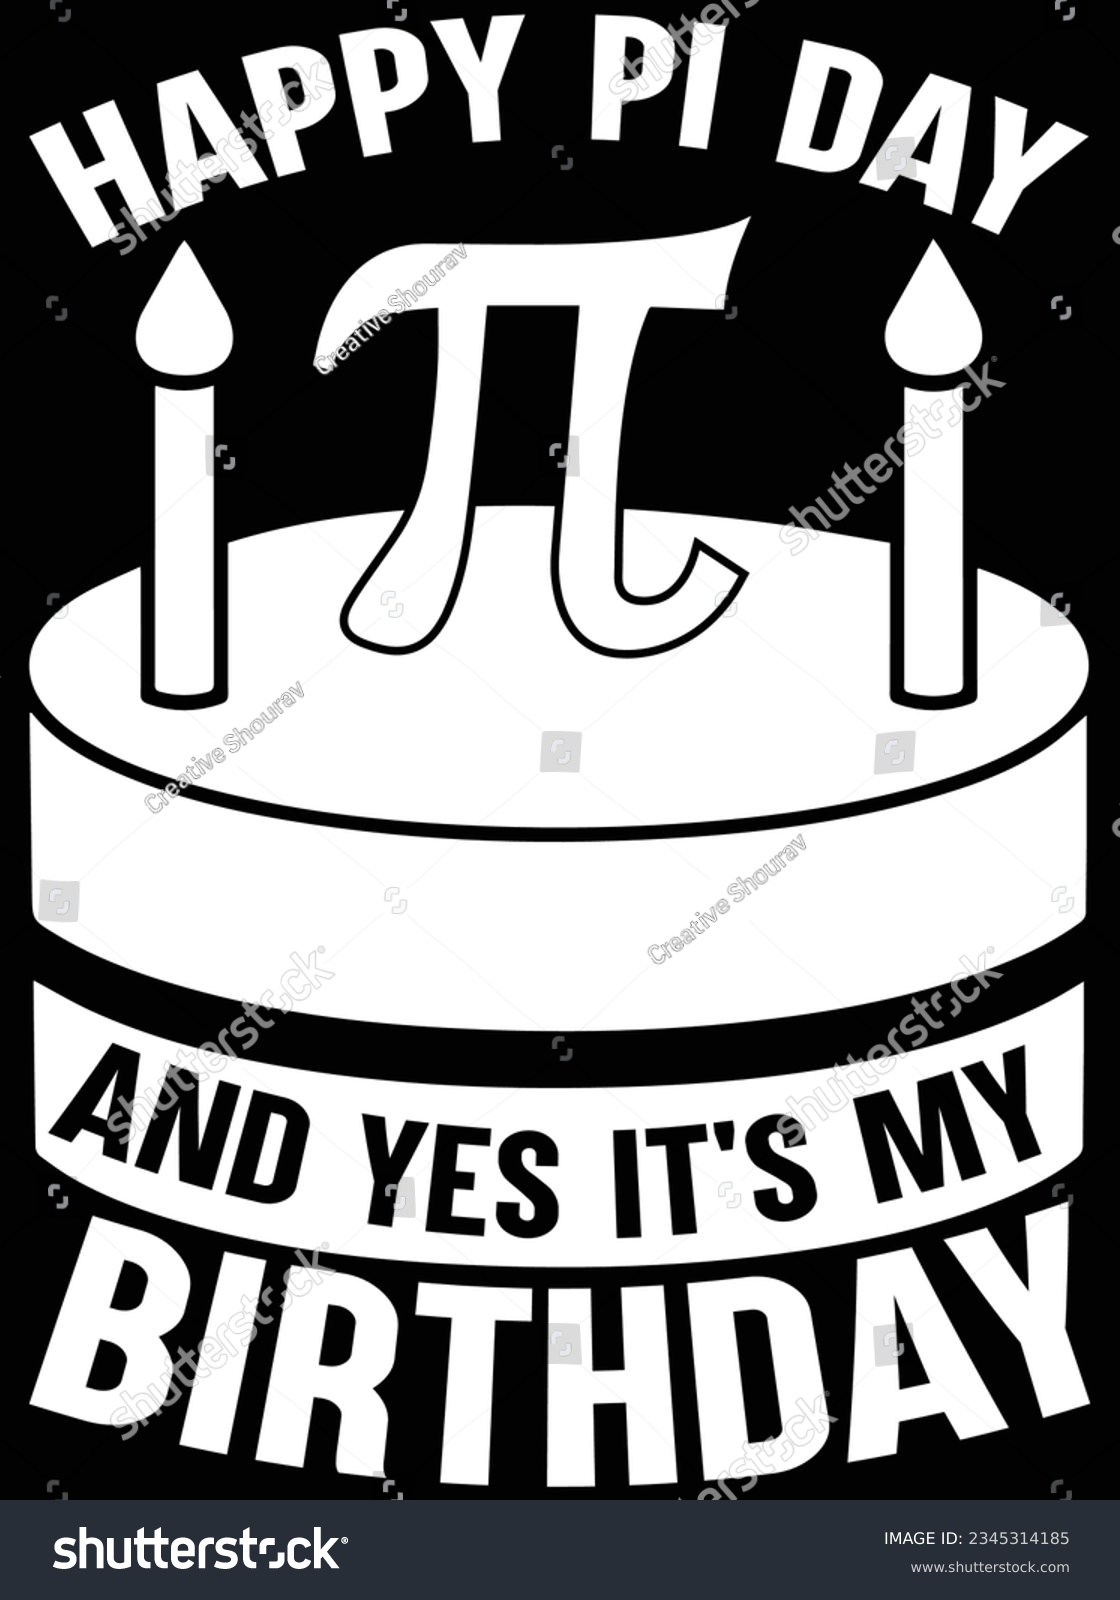 SVG of Happy pi day and yes It's my birthday vector art design, eps file. design file for t-shirt. SVG, EPS cuttable design file svg